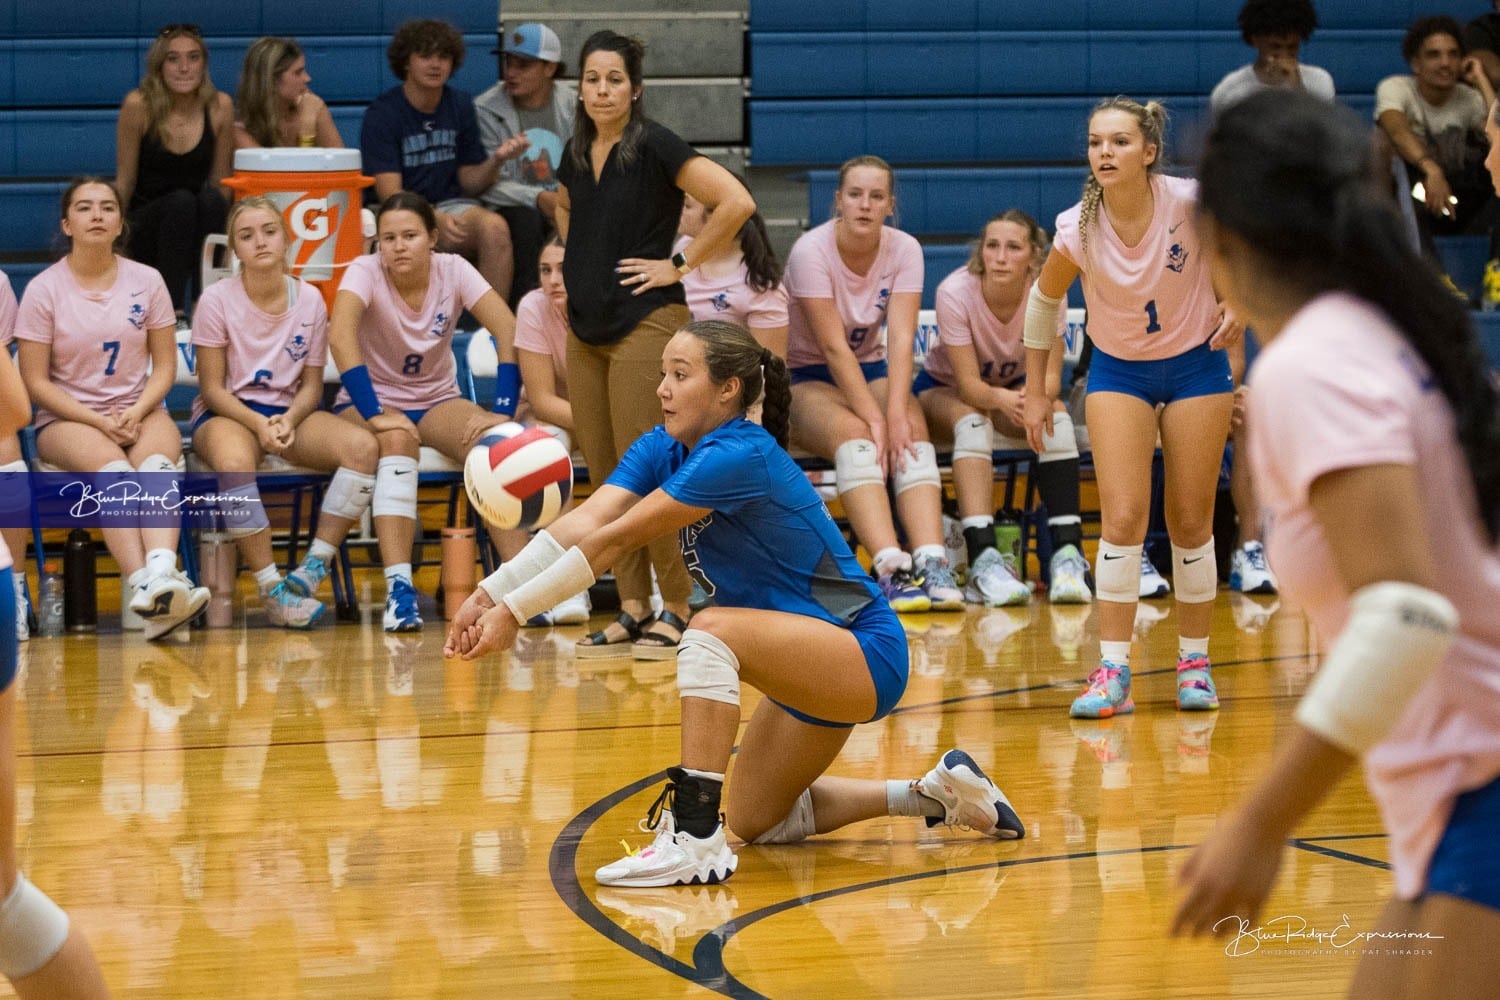 Brevard Volleyball gets 3-2 Win over West Henderson